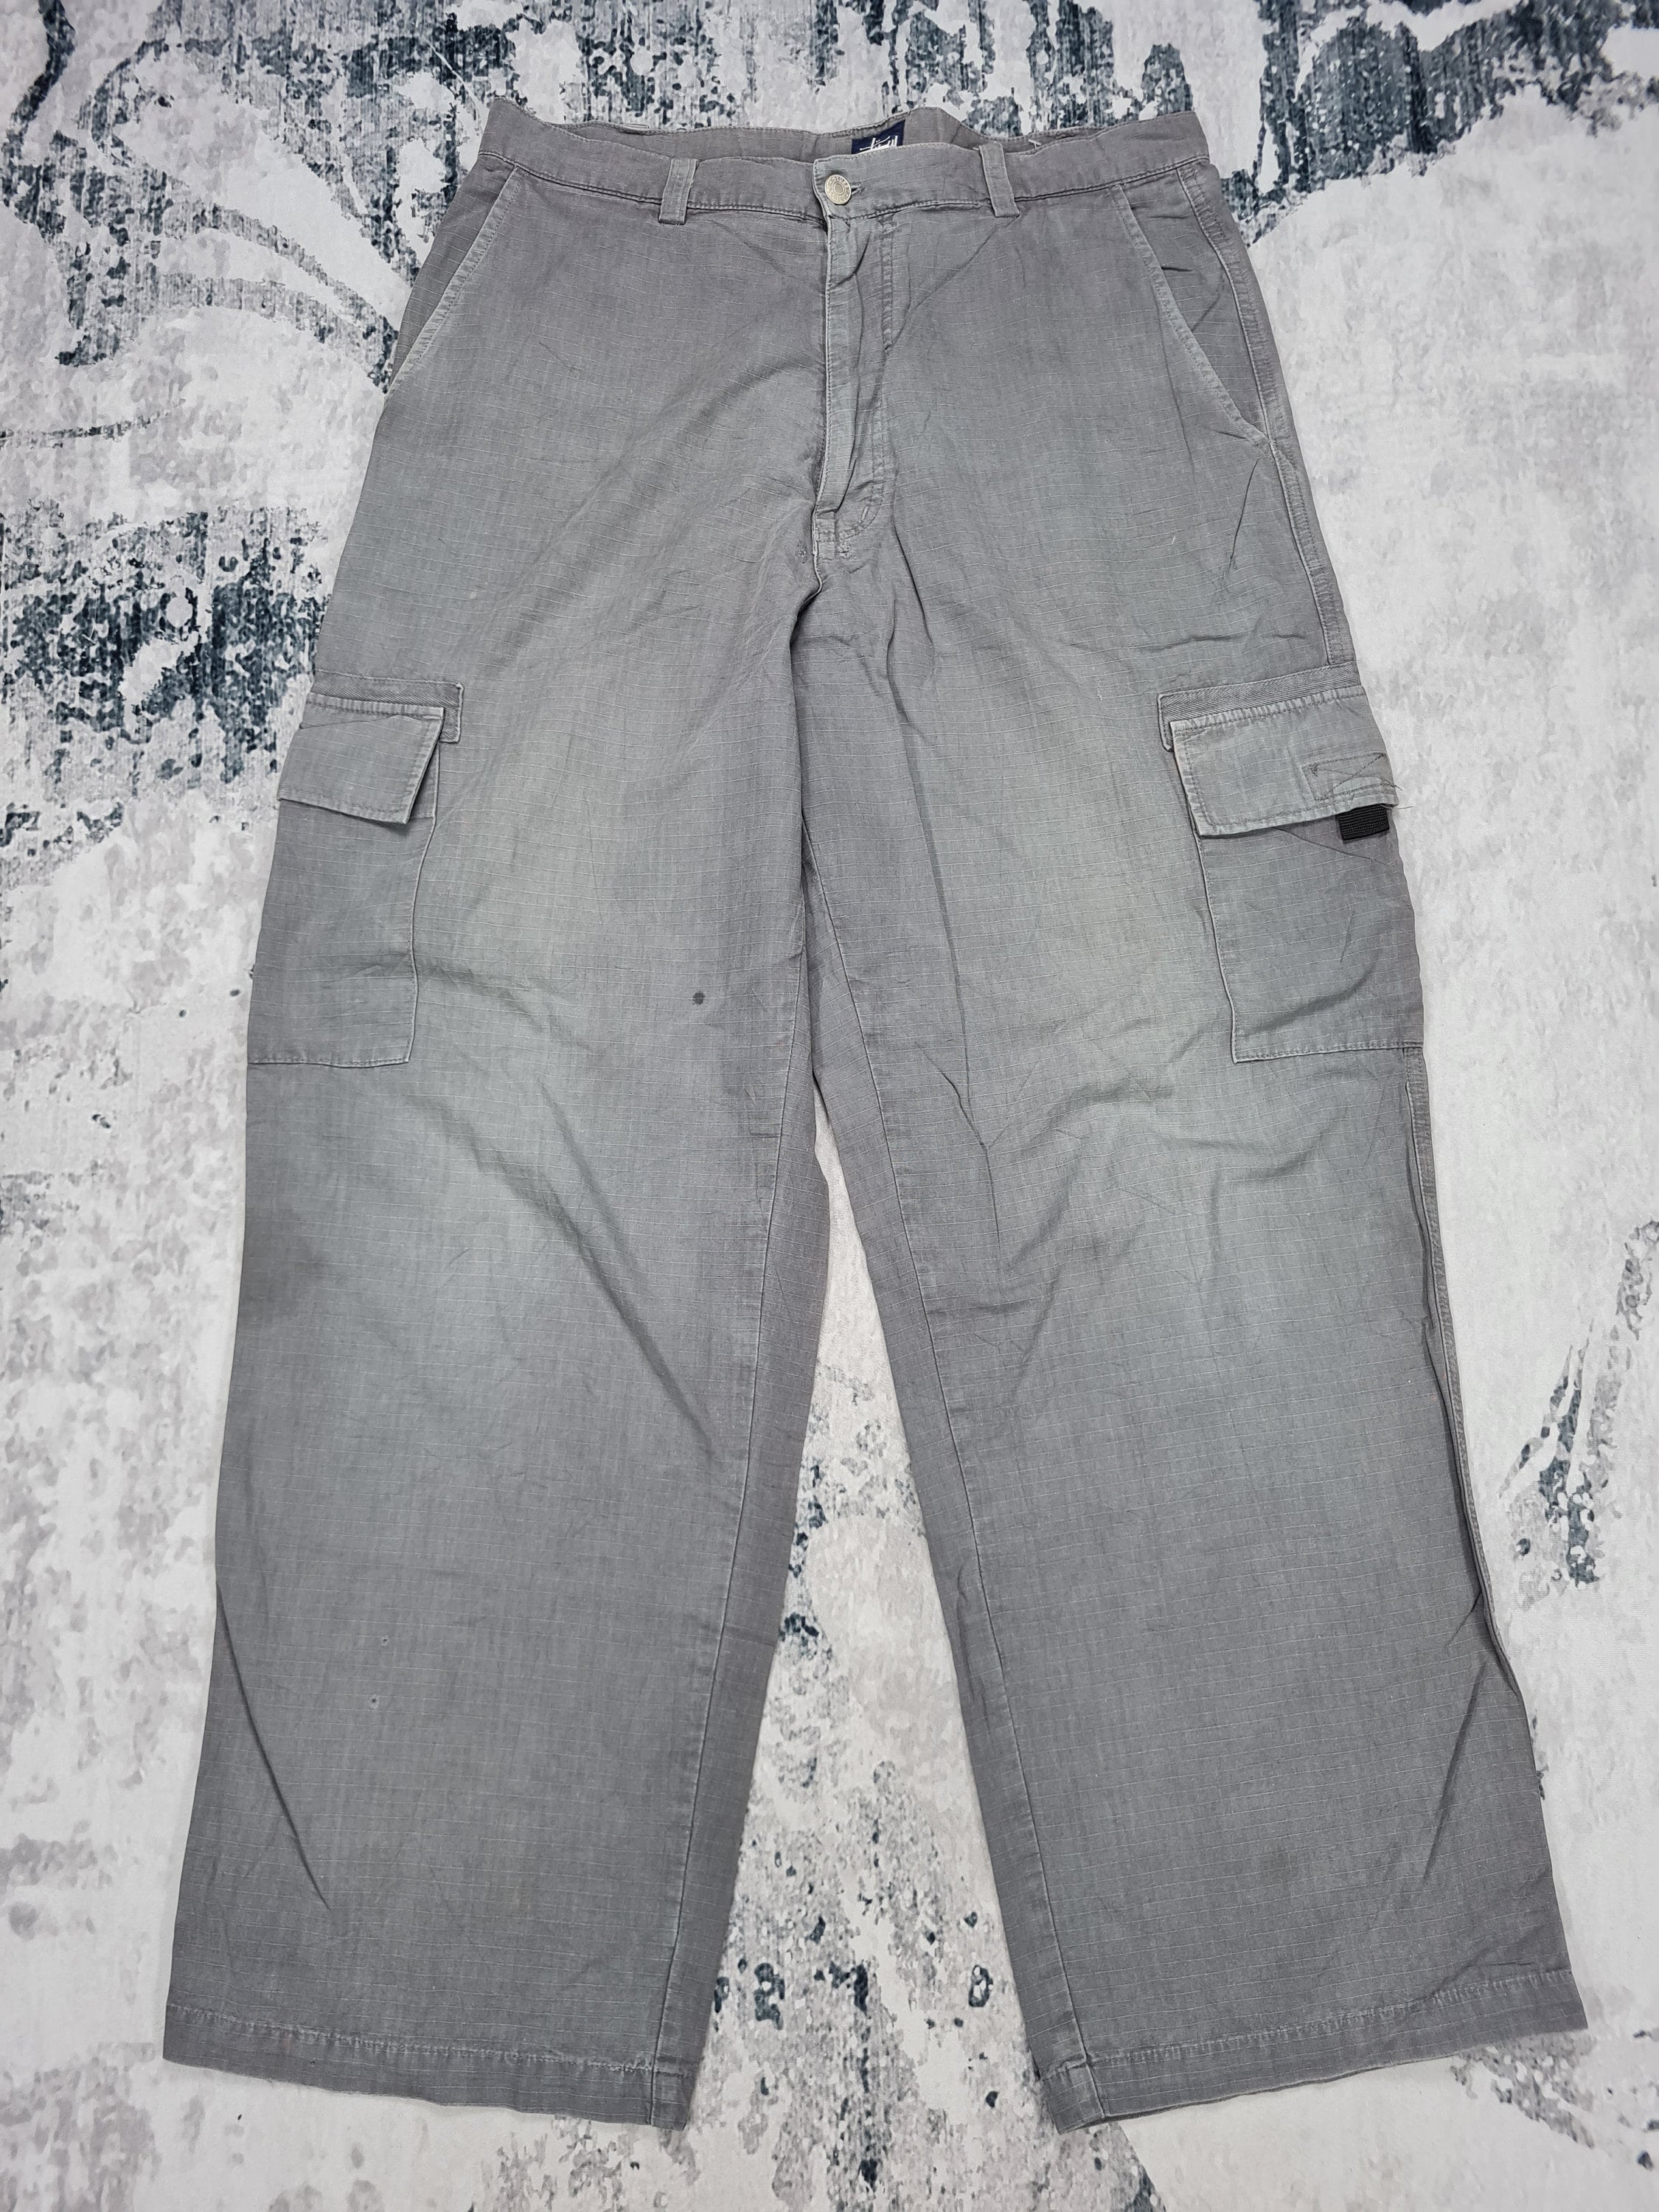 90's old stussy chino pants made in USA-